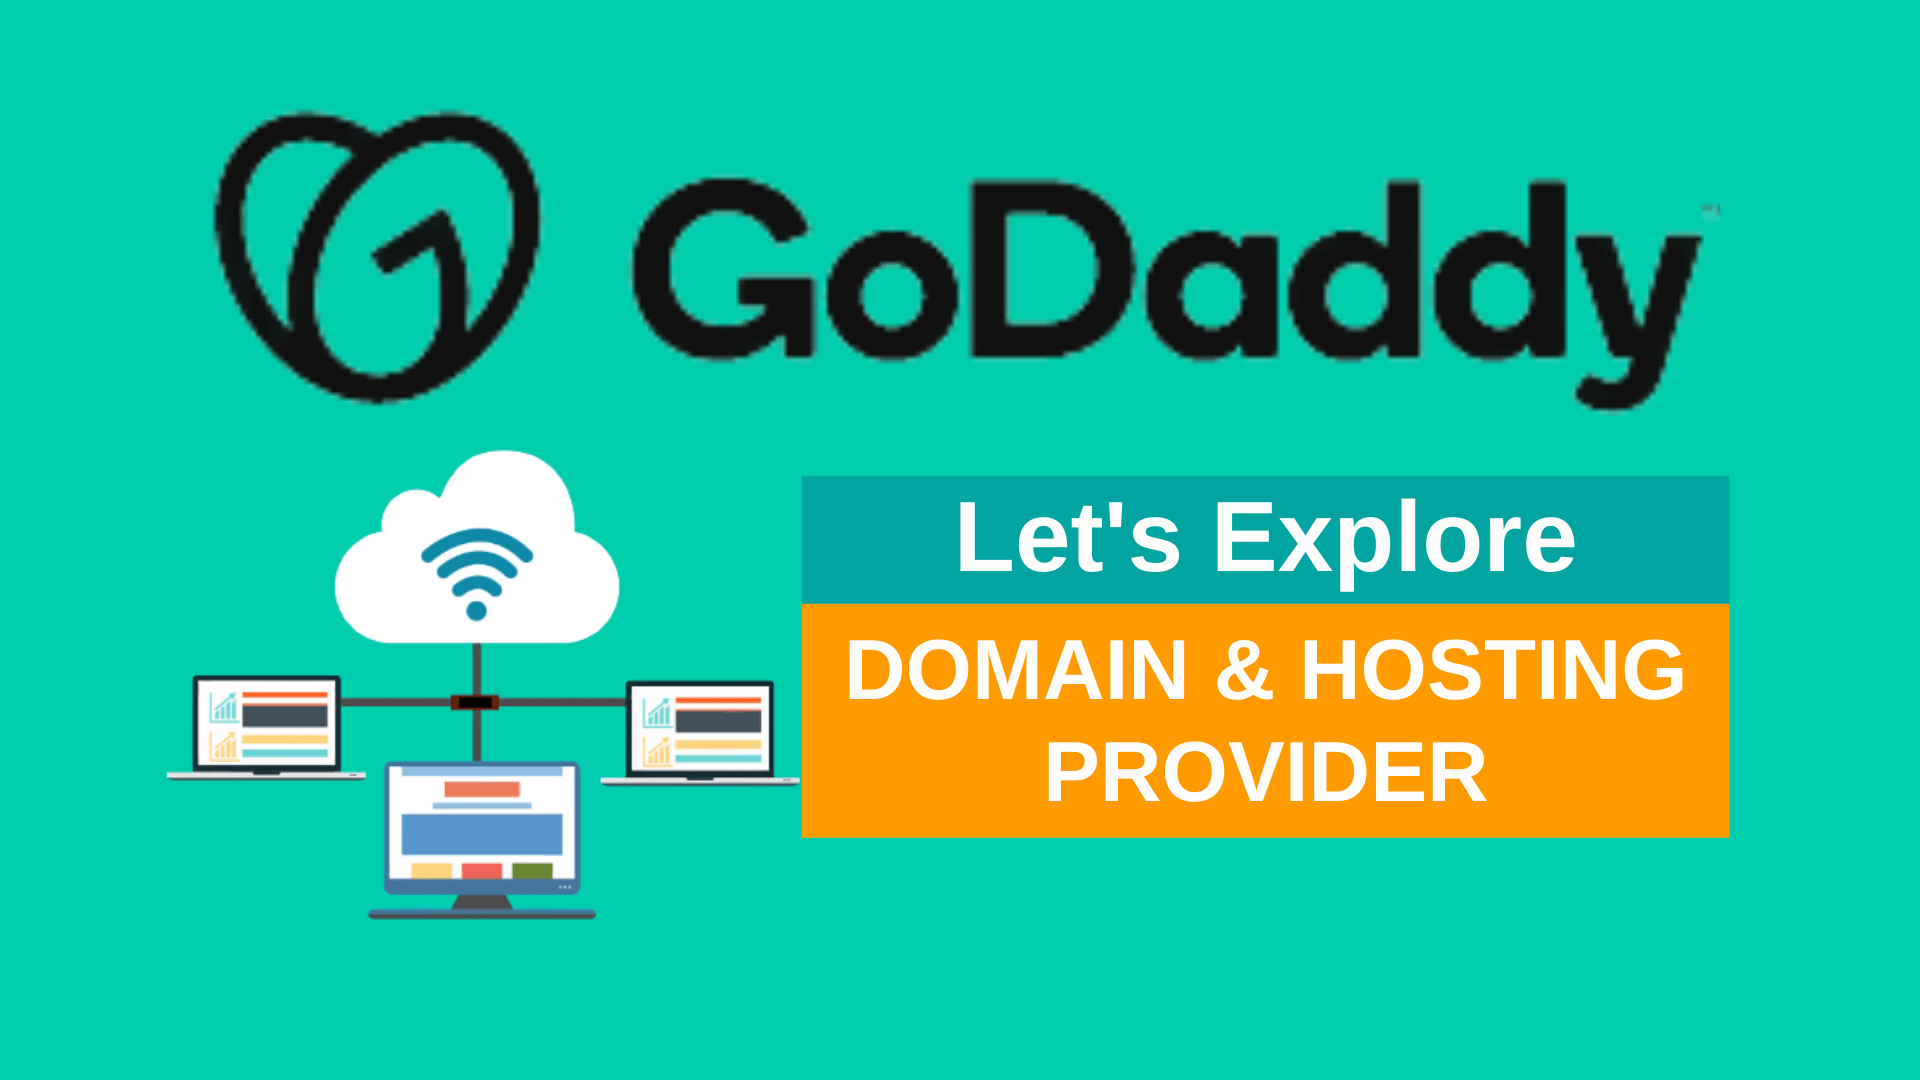 godaddy - the web hosting and domain provider